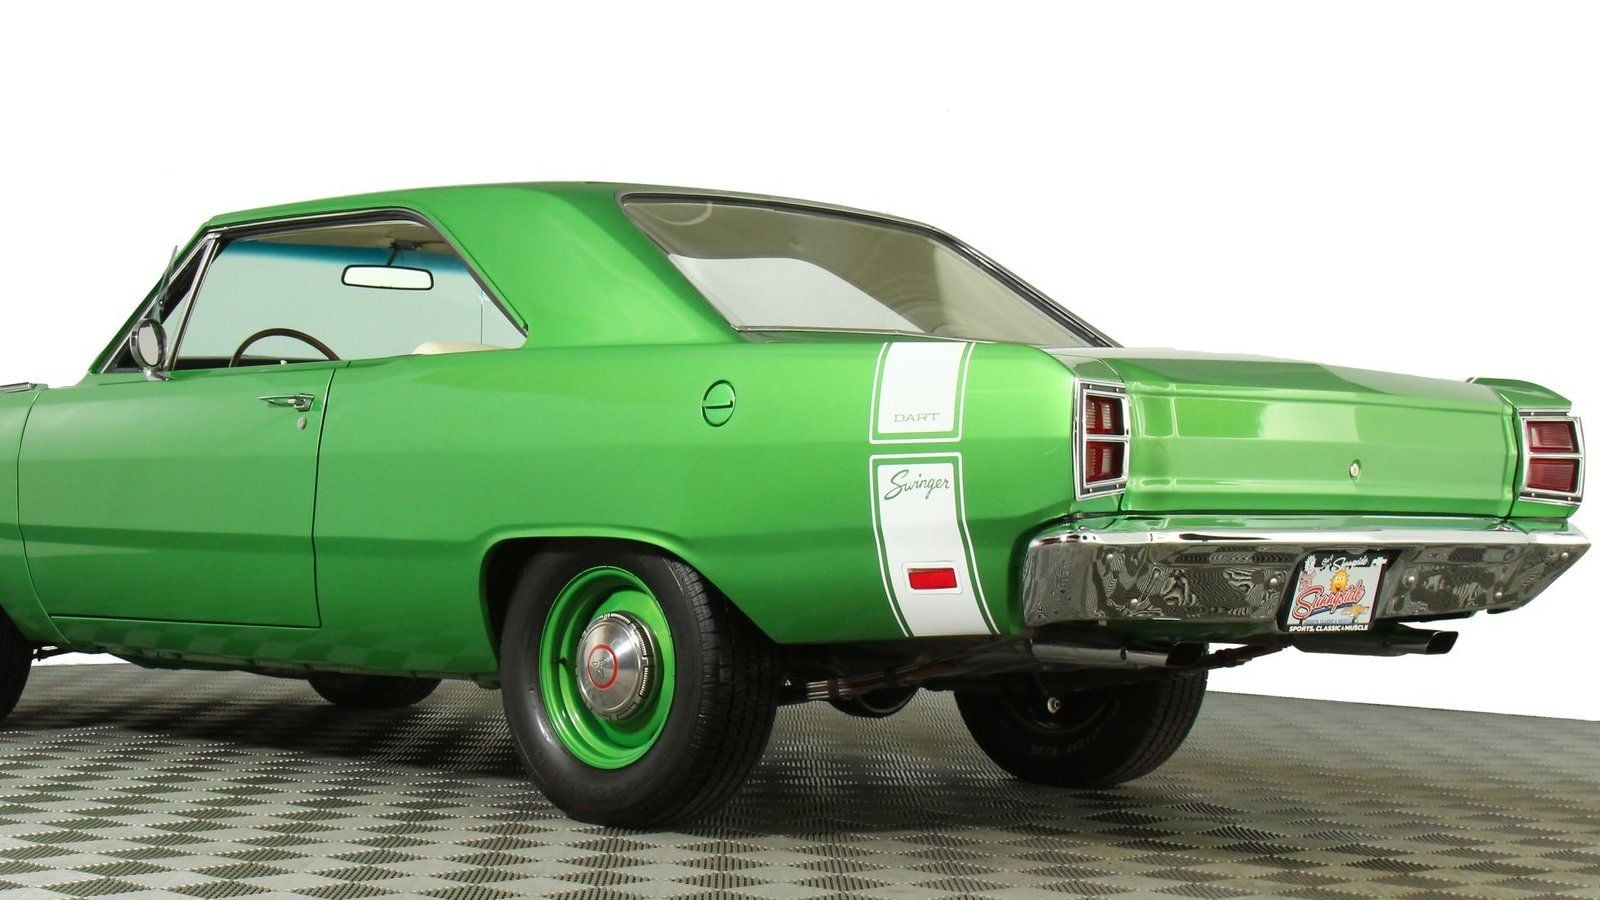 Mean Green 1969 Dart Makes Other Drivers Envious Dodgeforum photo